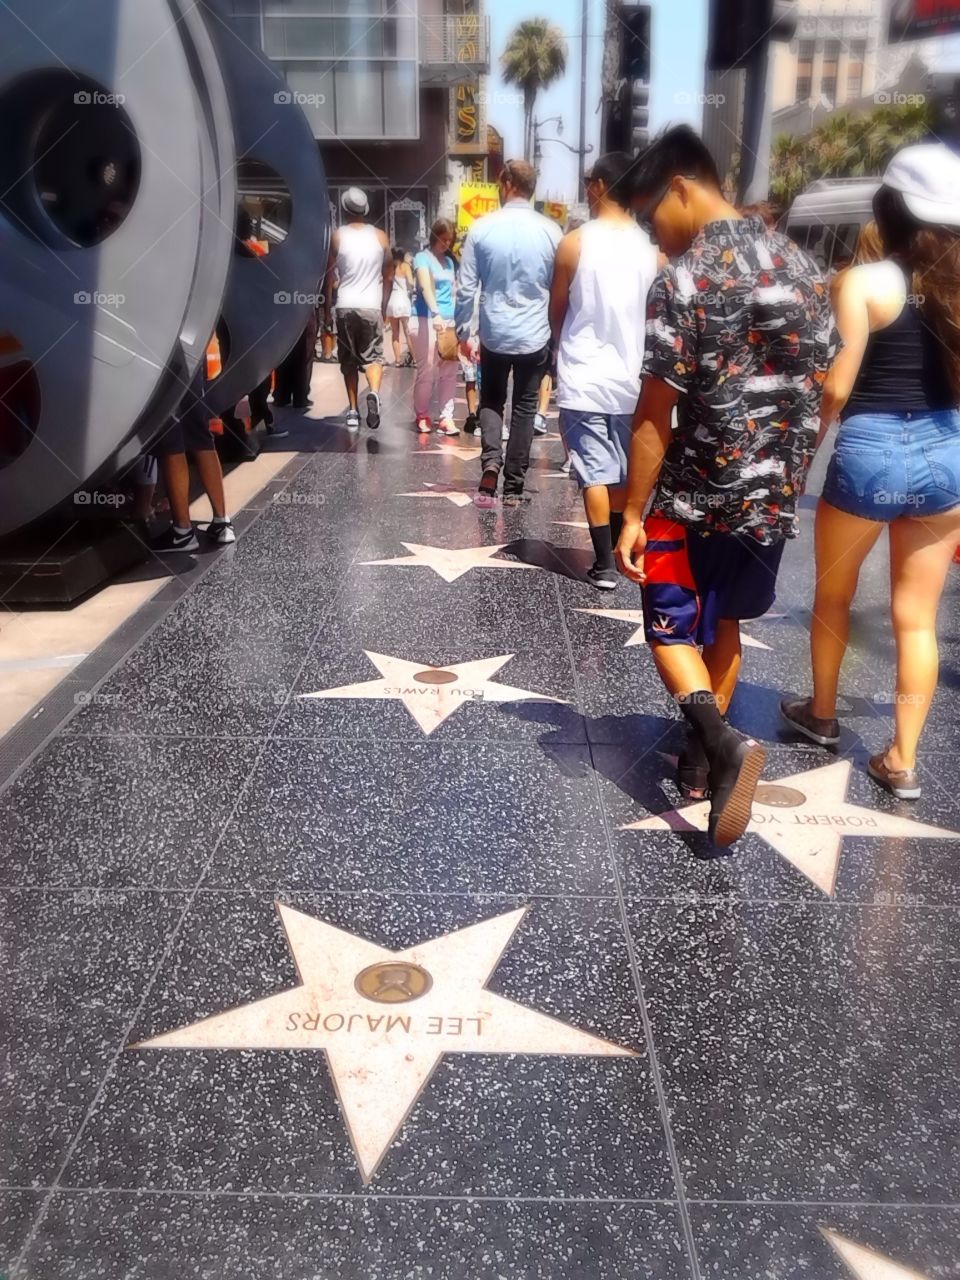 Walk of Fame. A day in Hollywood.
